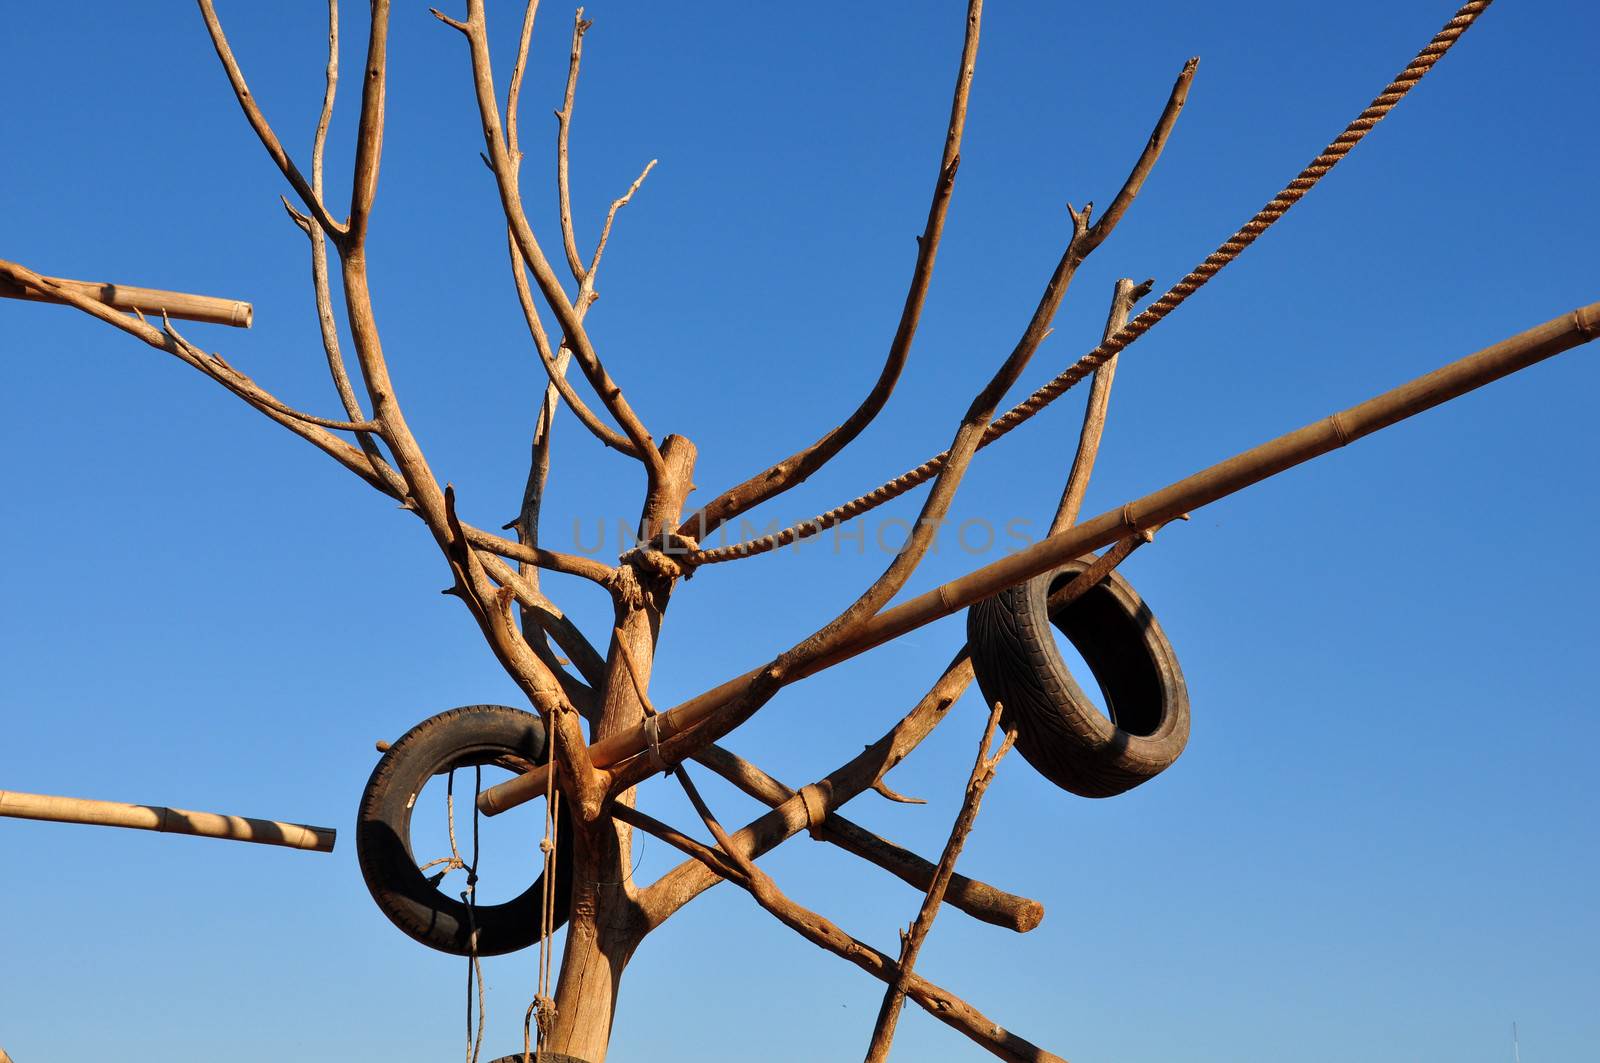 Tree with rubber tires and rope for animals at the zoo.